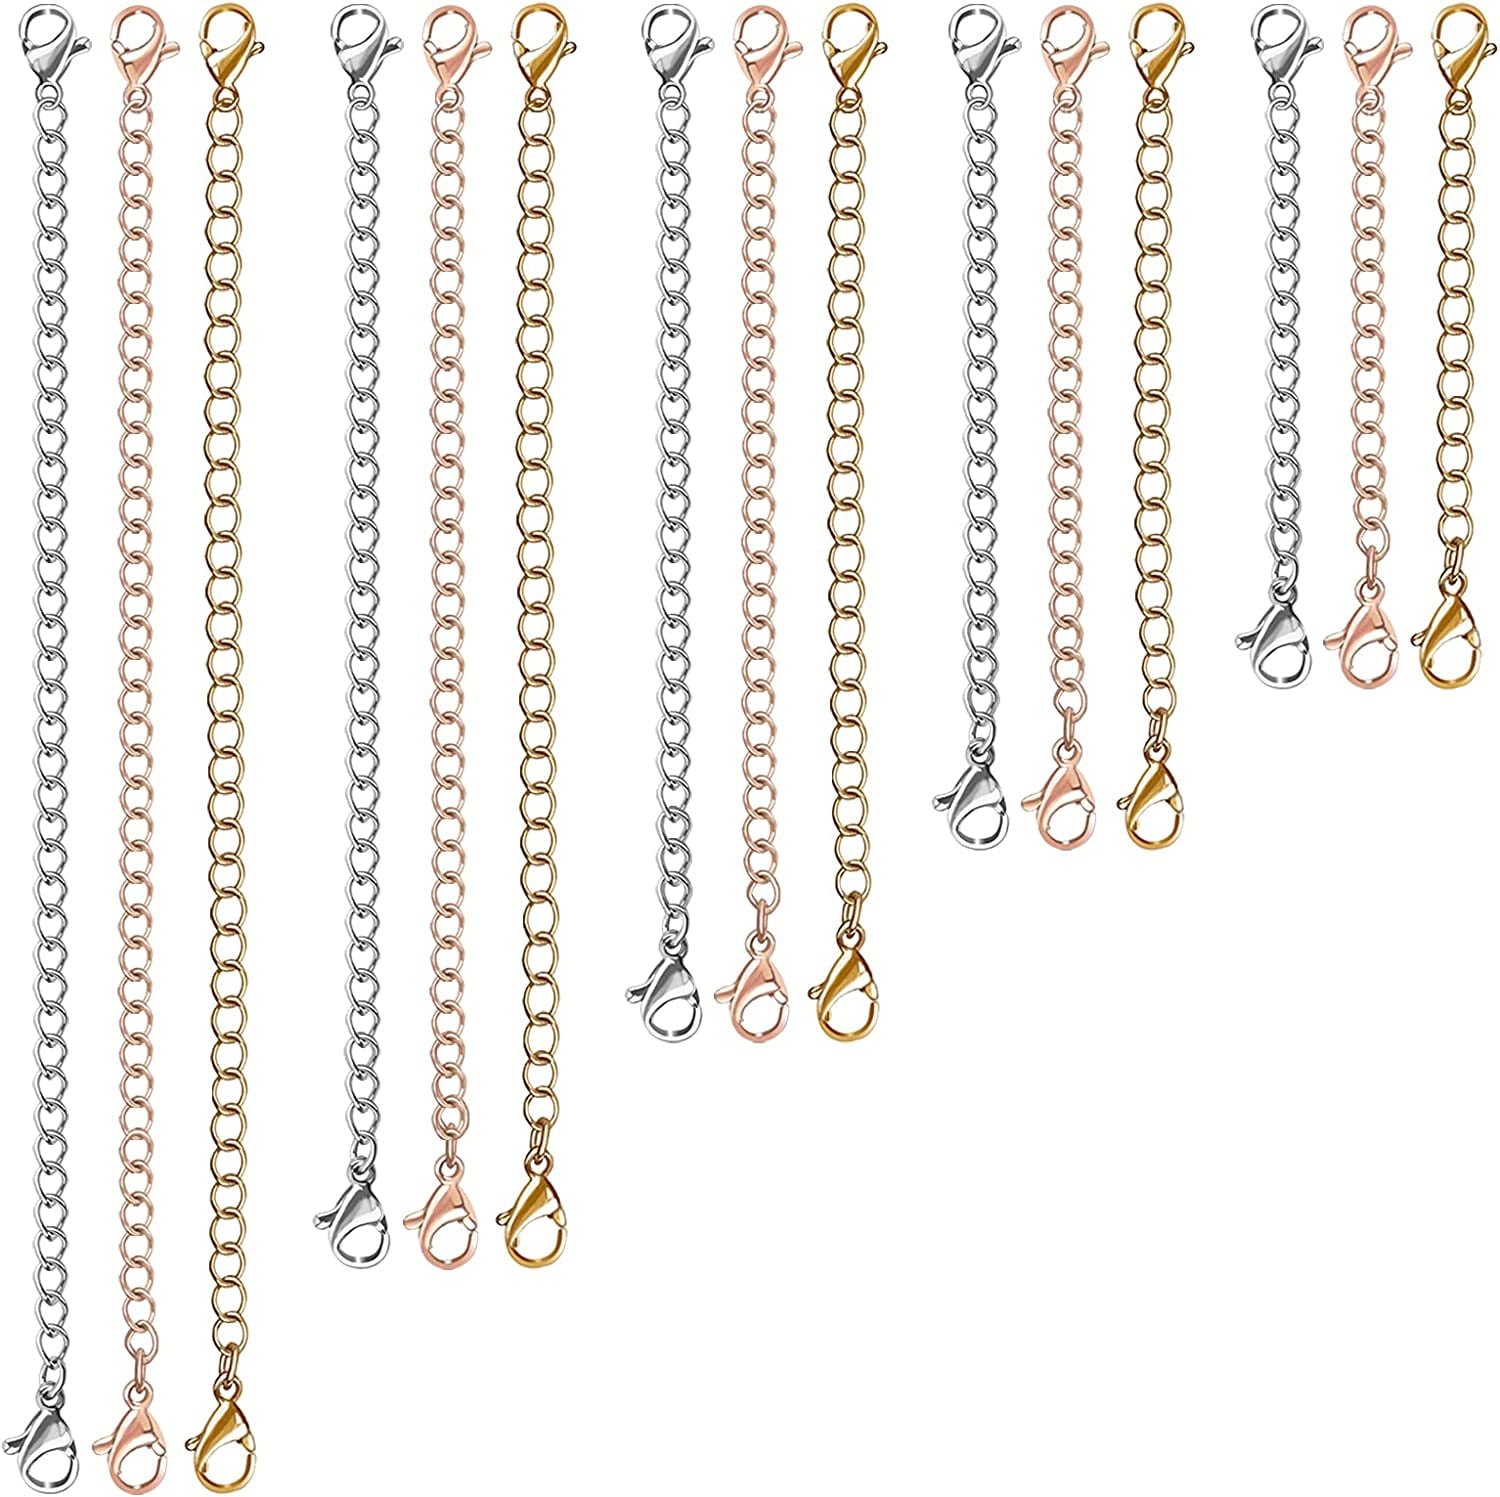 Necklace Extender, 12 PCS Chain Extenders for Necklaces, Premium Stainless  Steel Jewelry Bracelet Anklet Necklace Extenders(Silver), Length: 1.2 2  3 4 5 6, by 